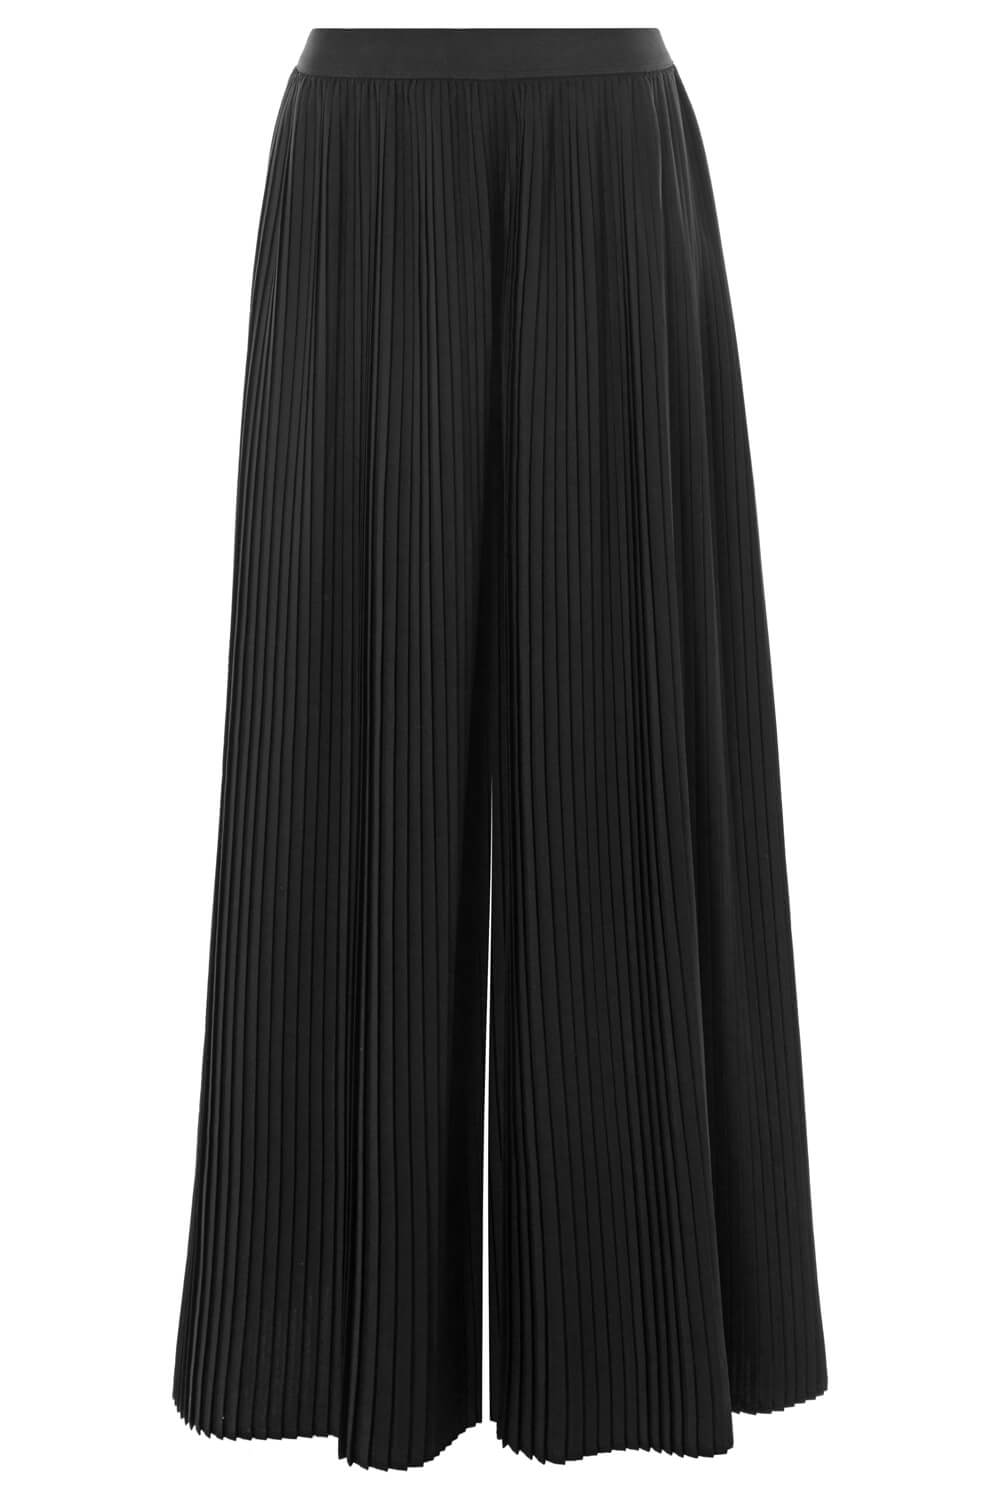 Black Pleated Wide Leg Trousers, Image 5 of 5